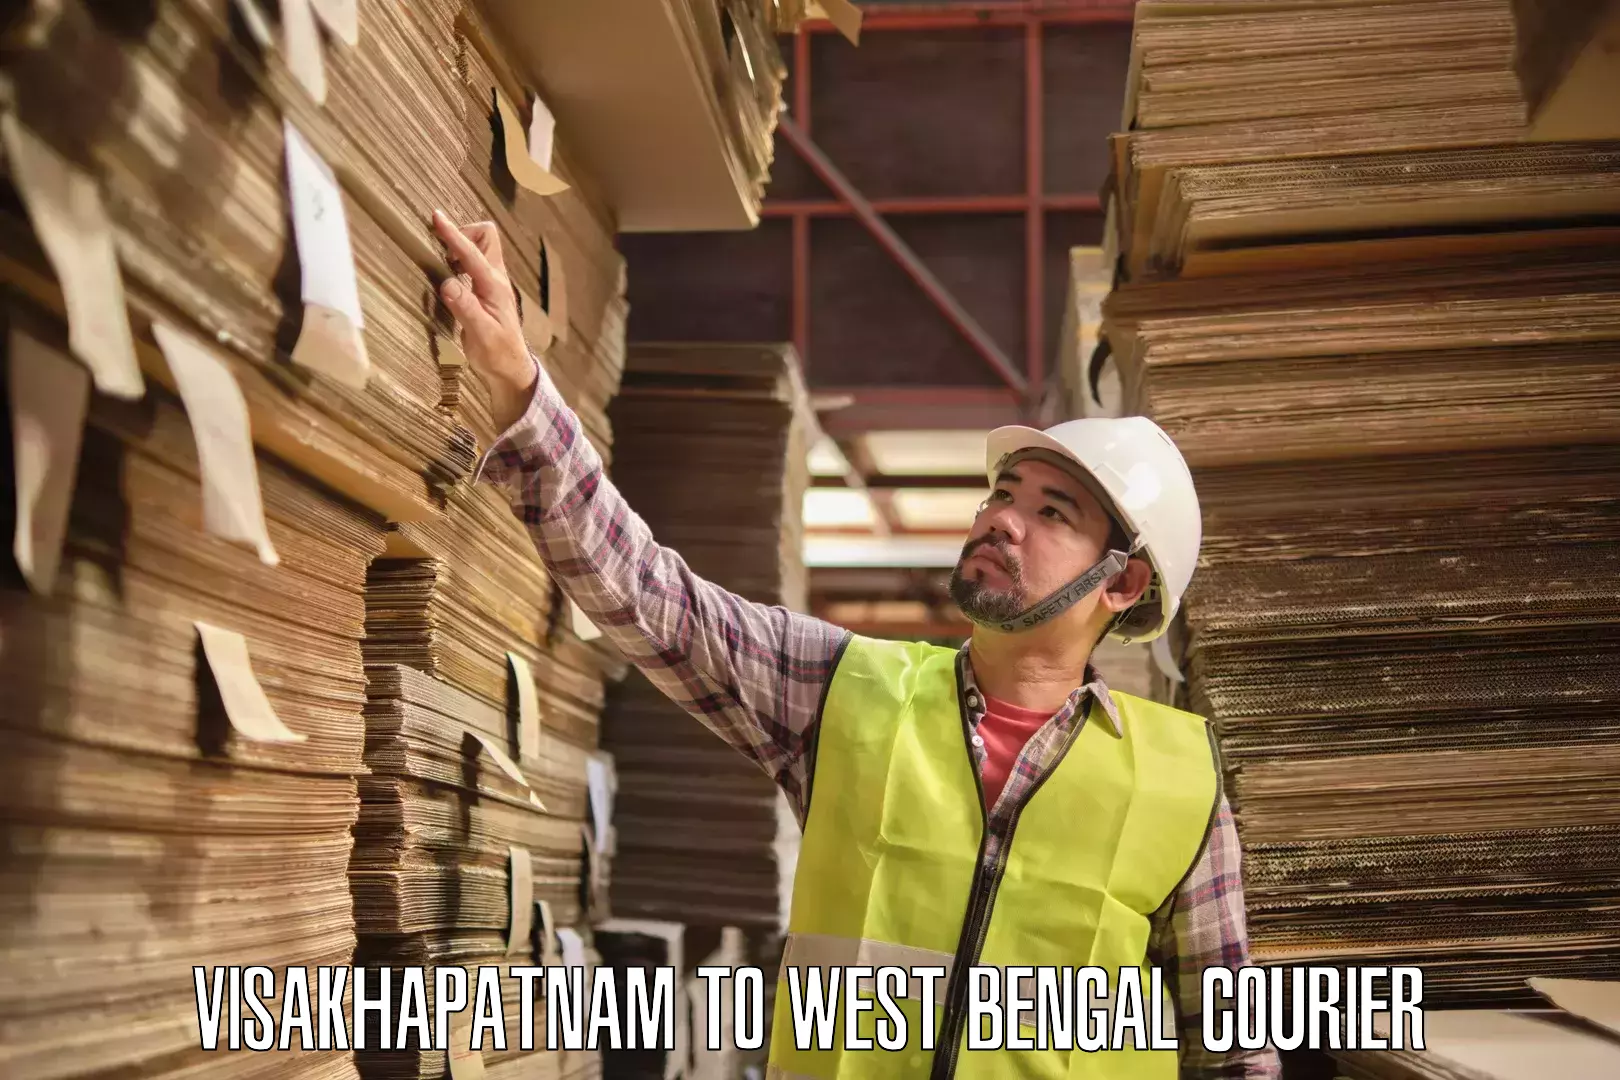 Comprehensive shipping network Visakhapatnam to West Bengal